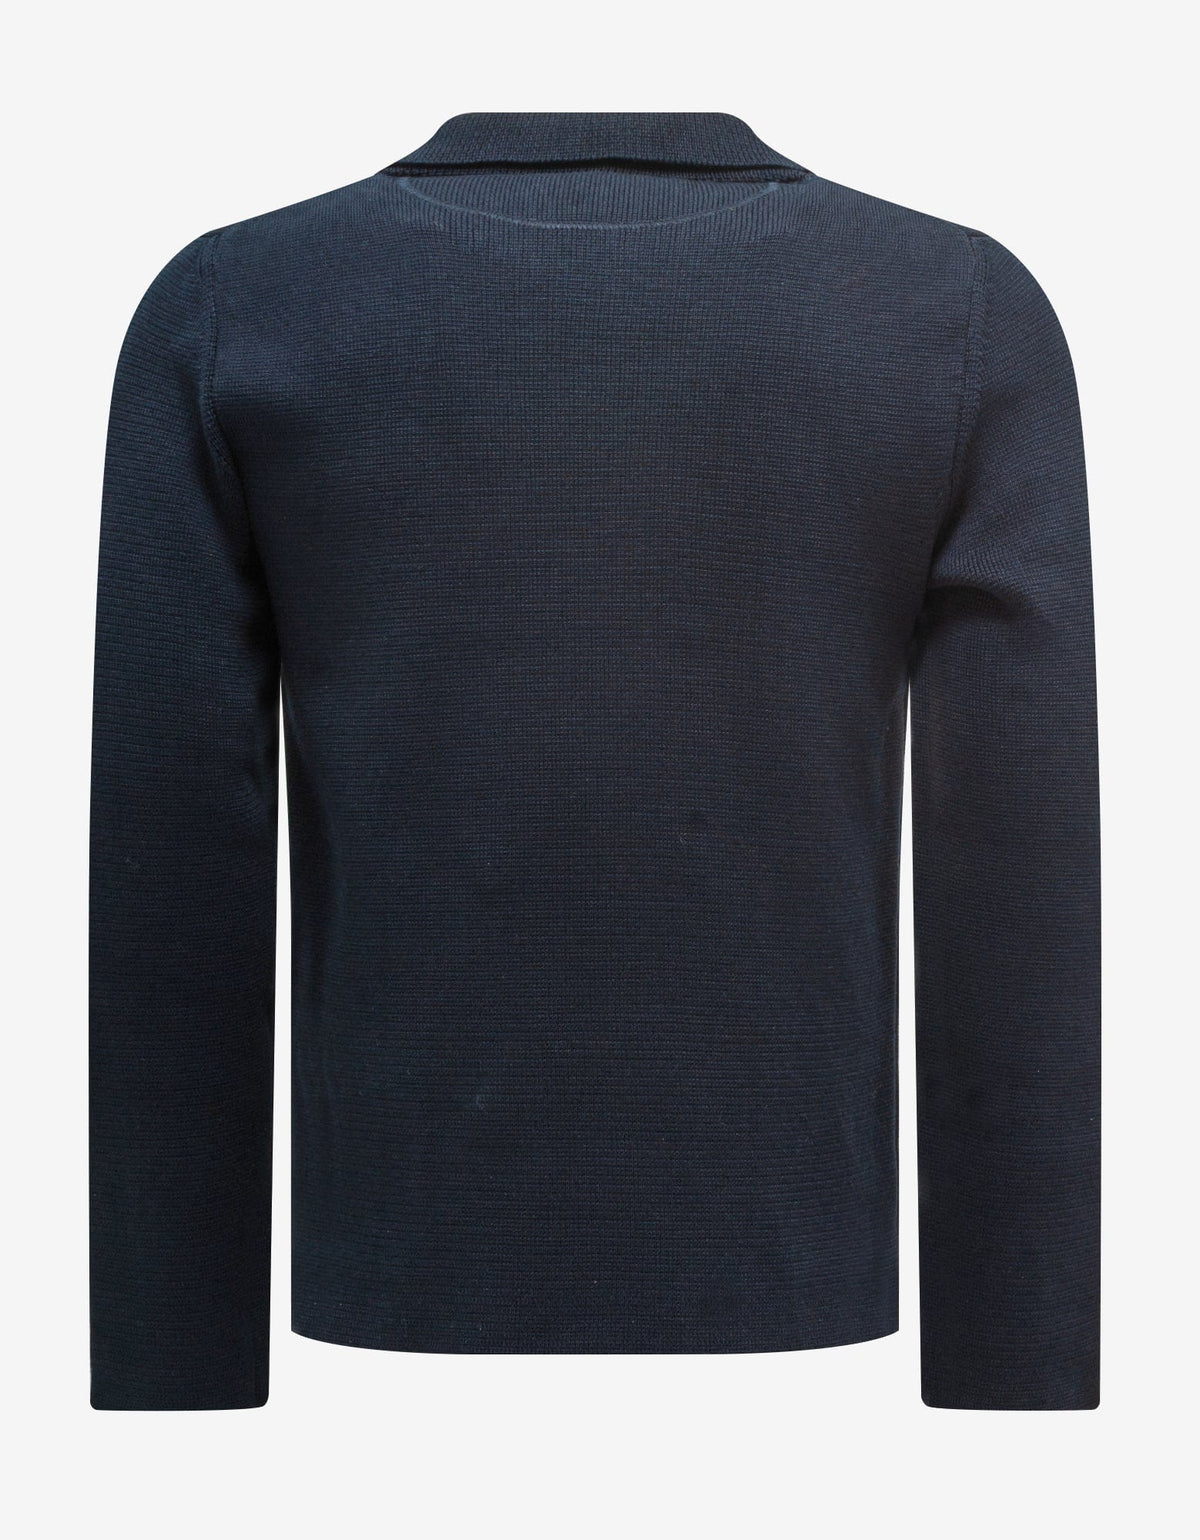 Valentino Navy Blue Double-Breasted Knitted Jacket